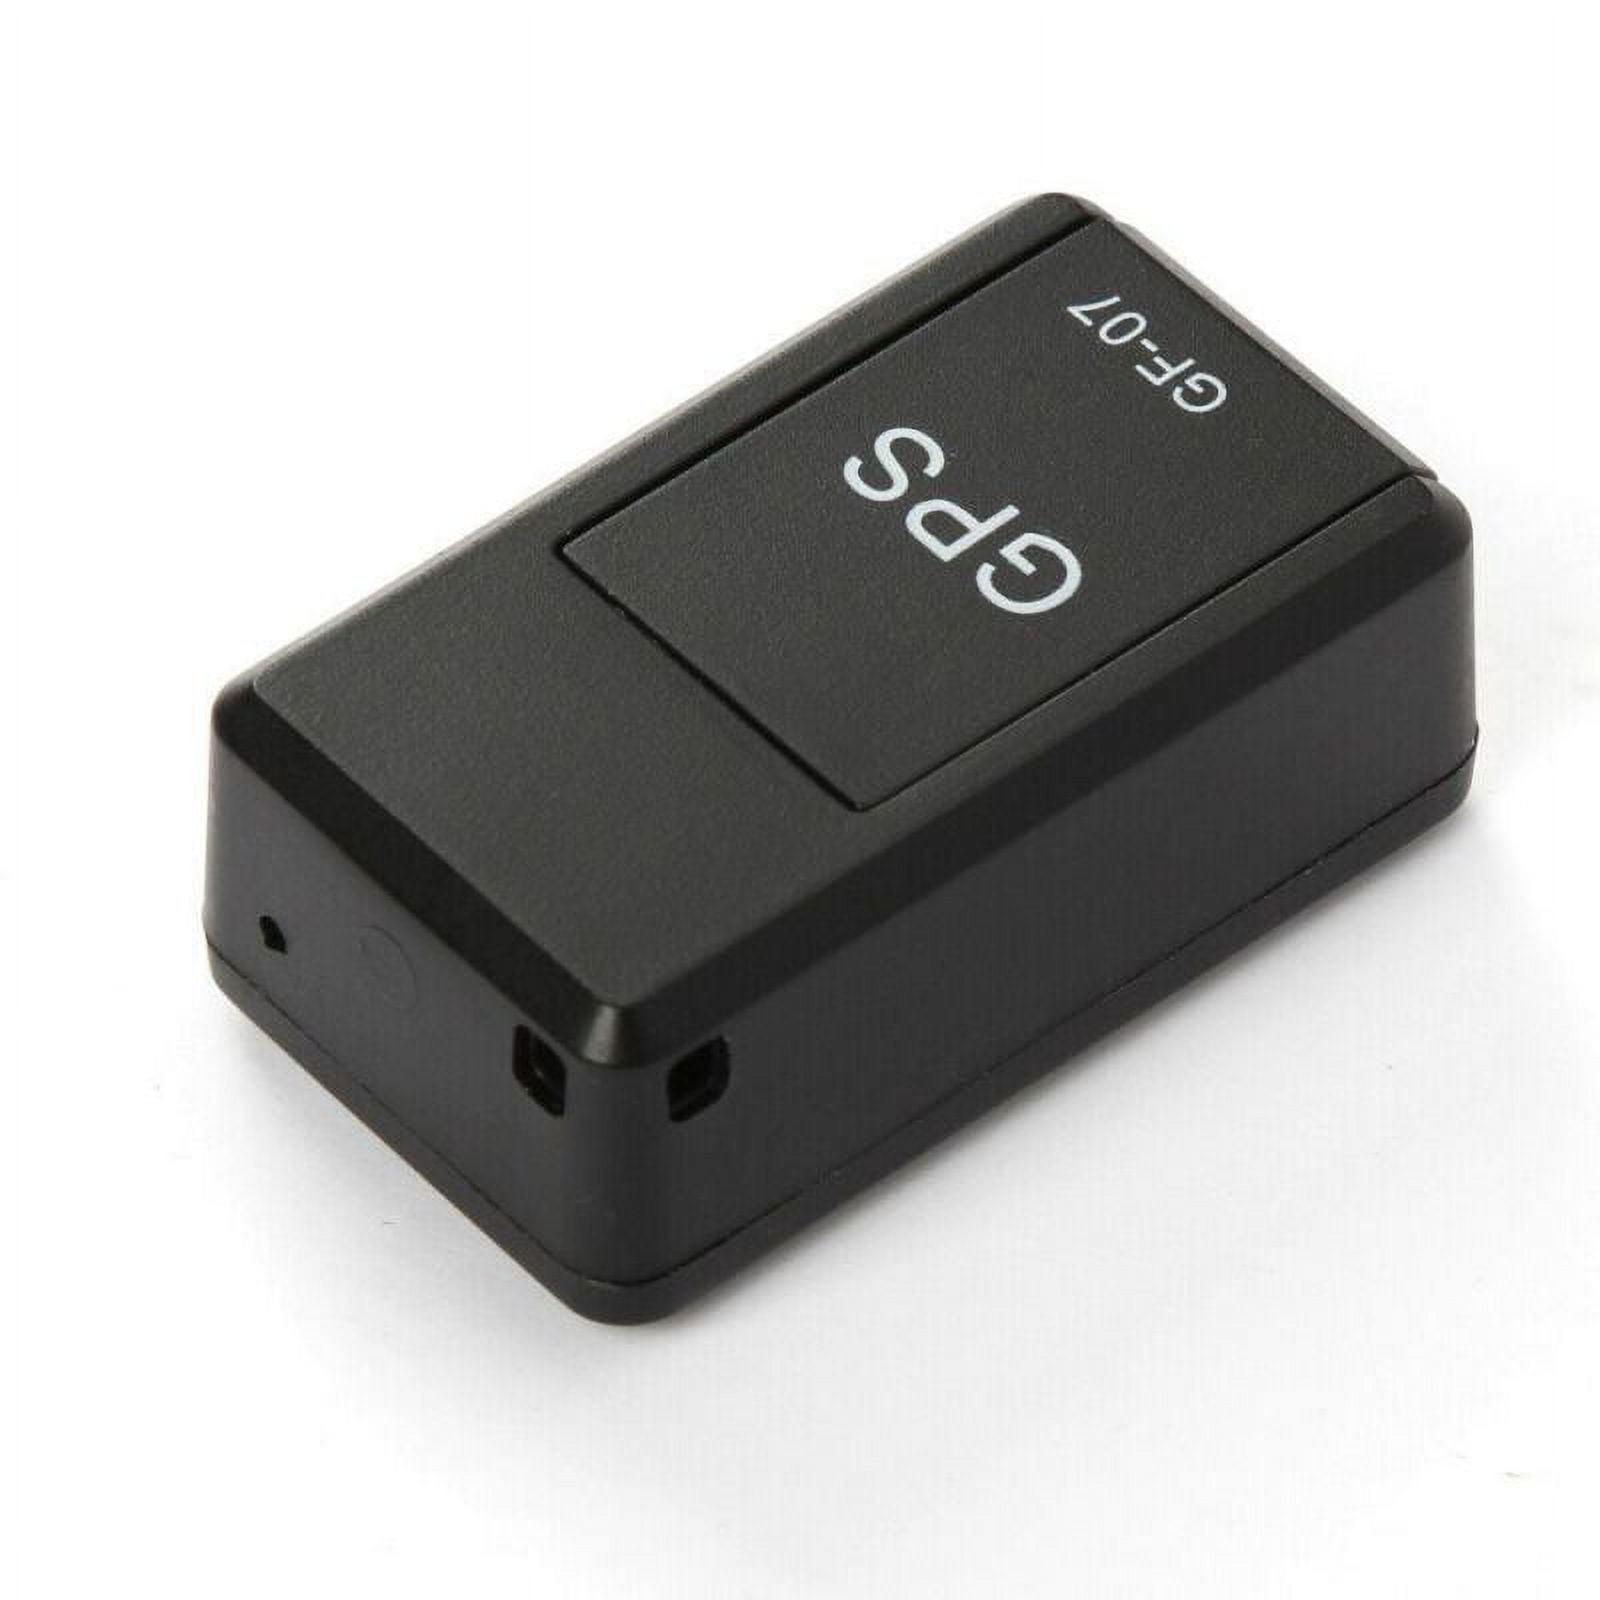  MOTOsafety OBD GPS Car Tracker, Hidden Vehicle Tracker and  Monitoring System with Real Time Location GPS Reports, For Auto, Adults,  Fleet, Parents, Teen, Elderly, 4G with Phone App : Electronics